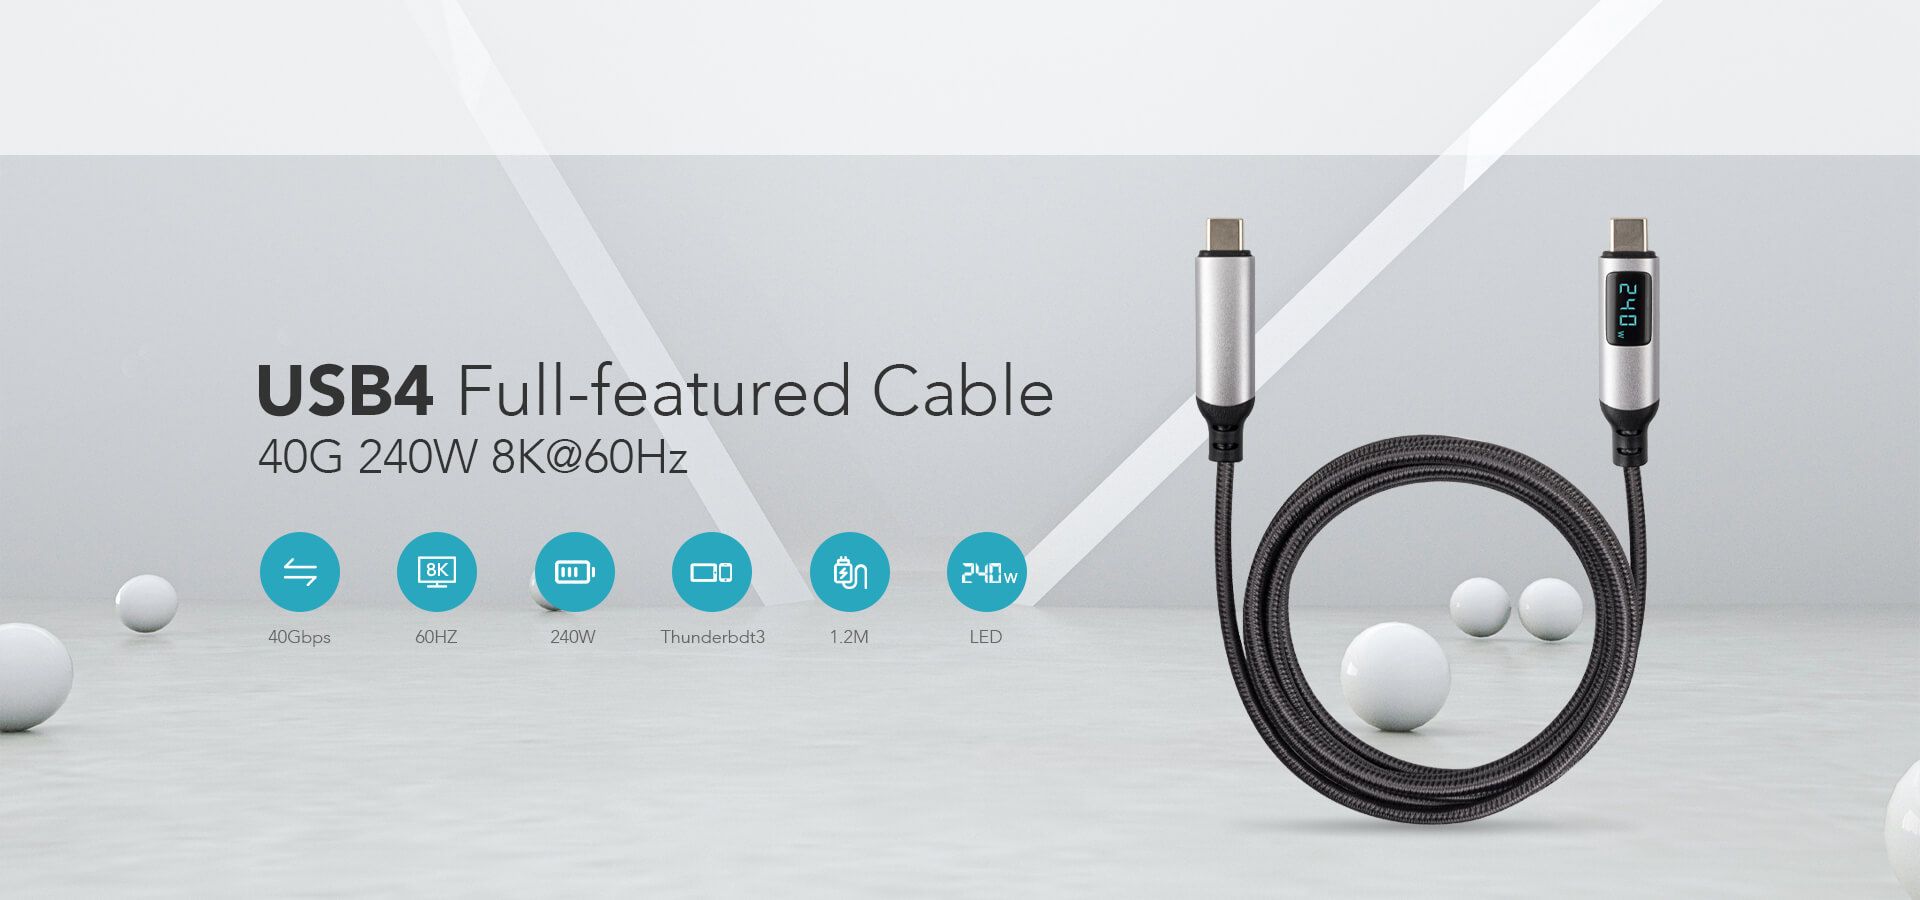 USB Full-featured Cable